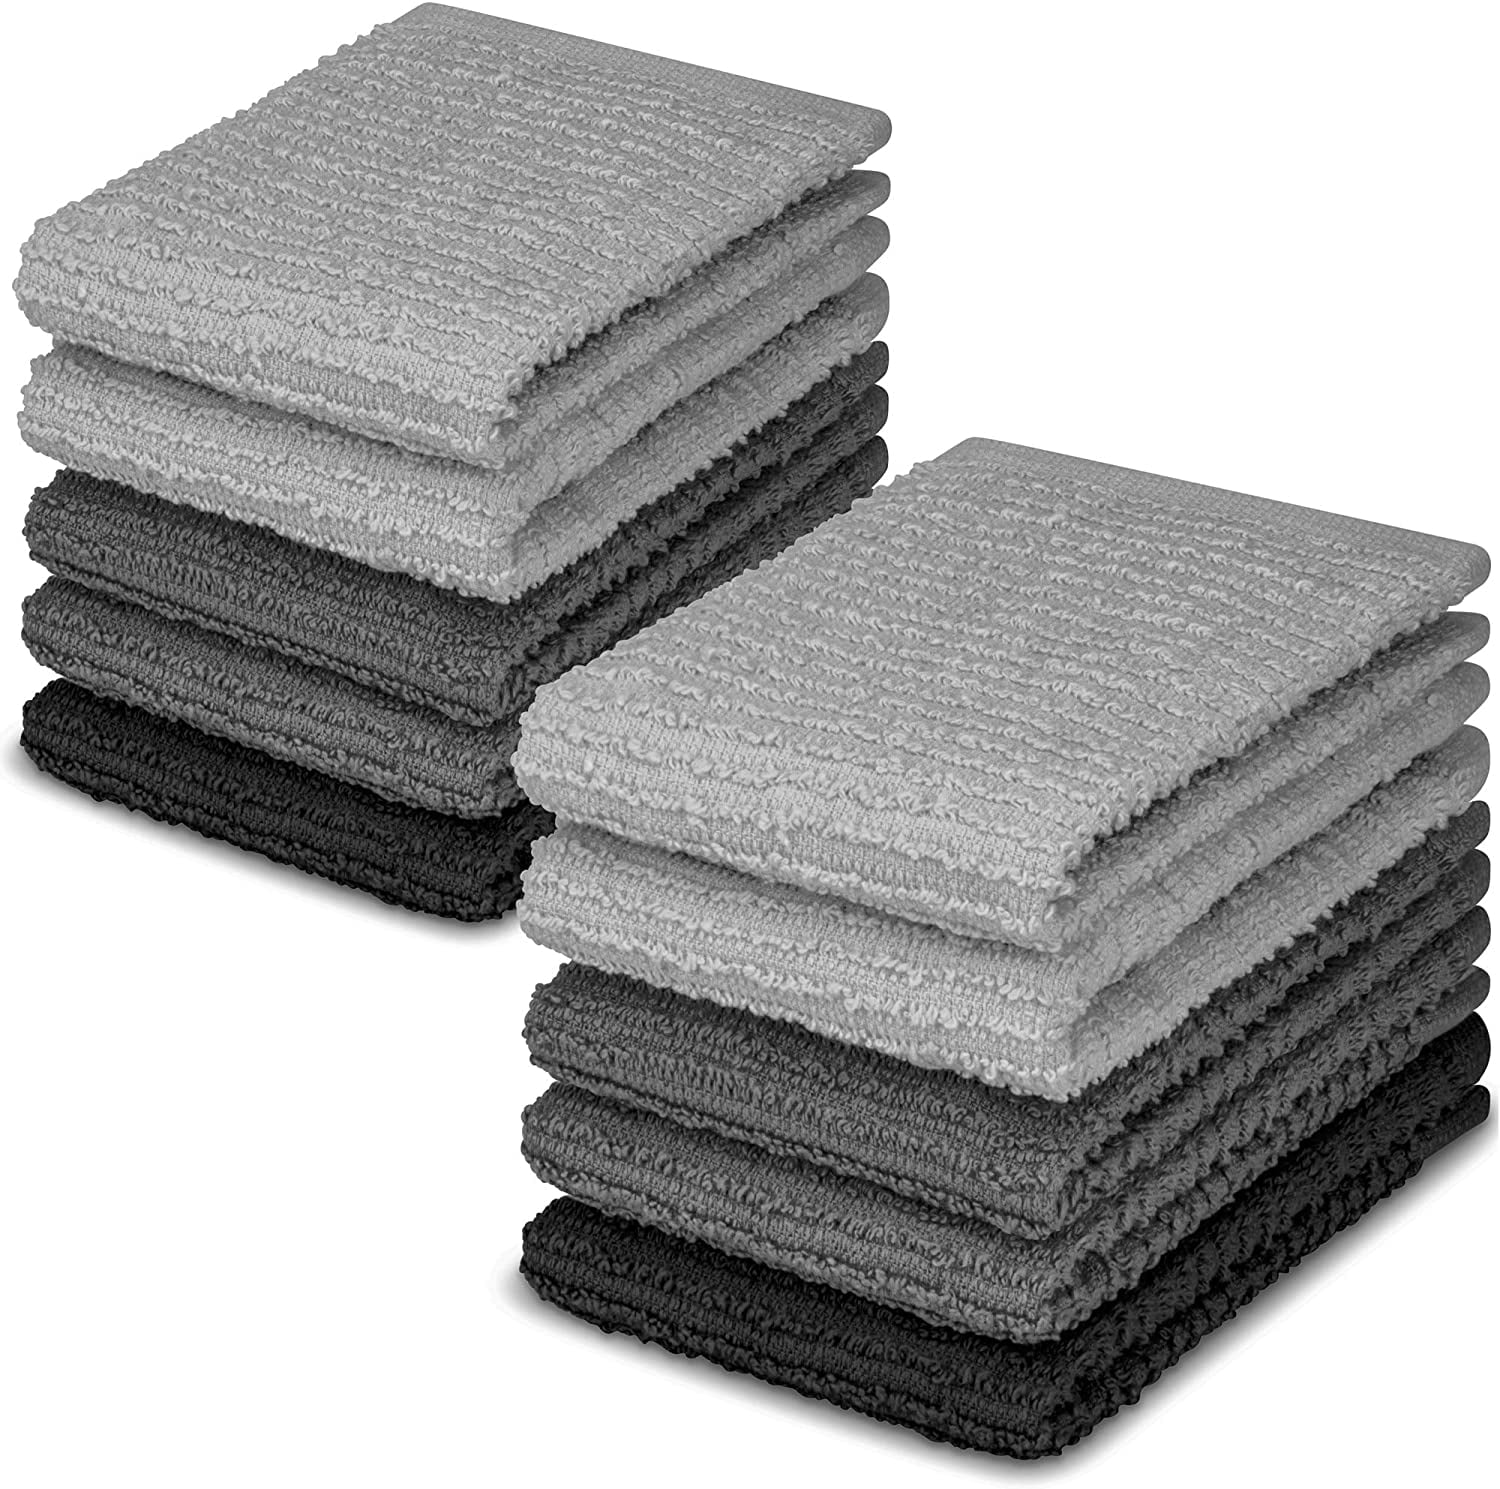 pichler Set of 2 dish towels COLORADO in gray/ black/ brown